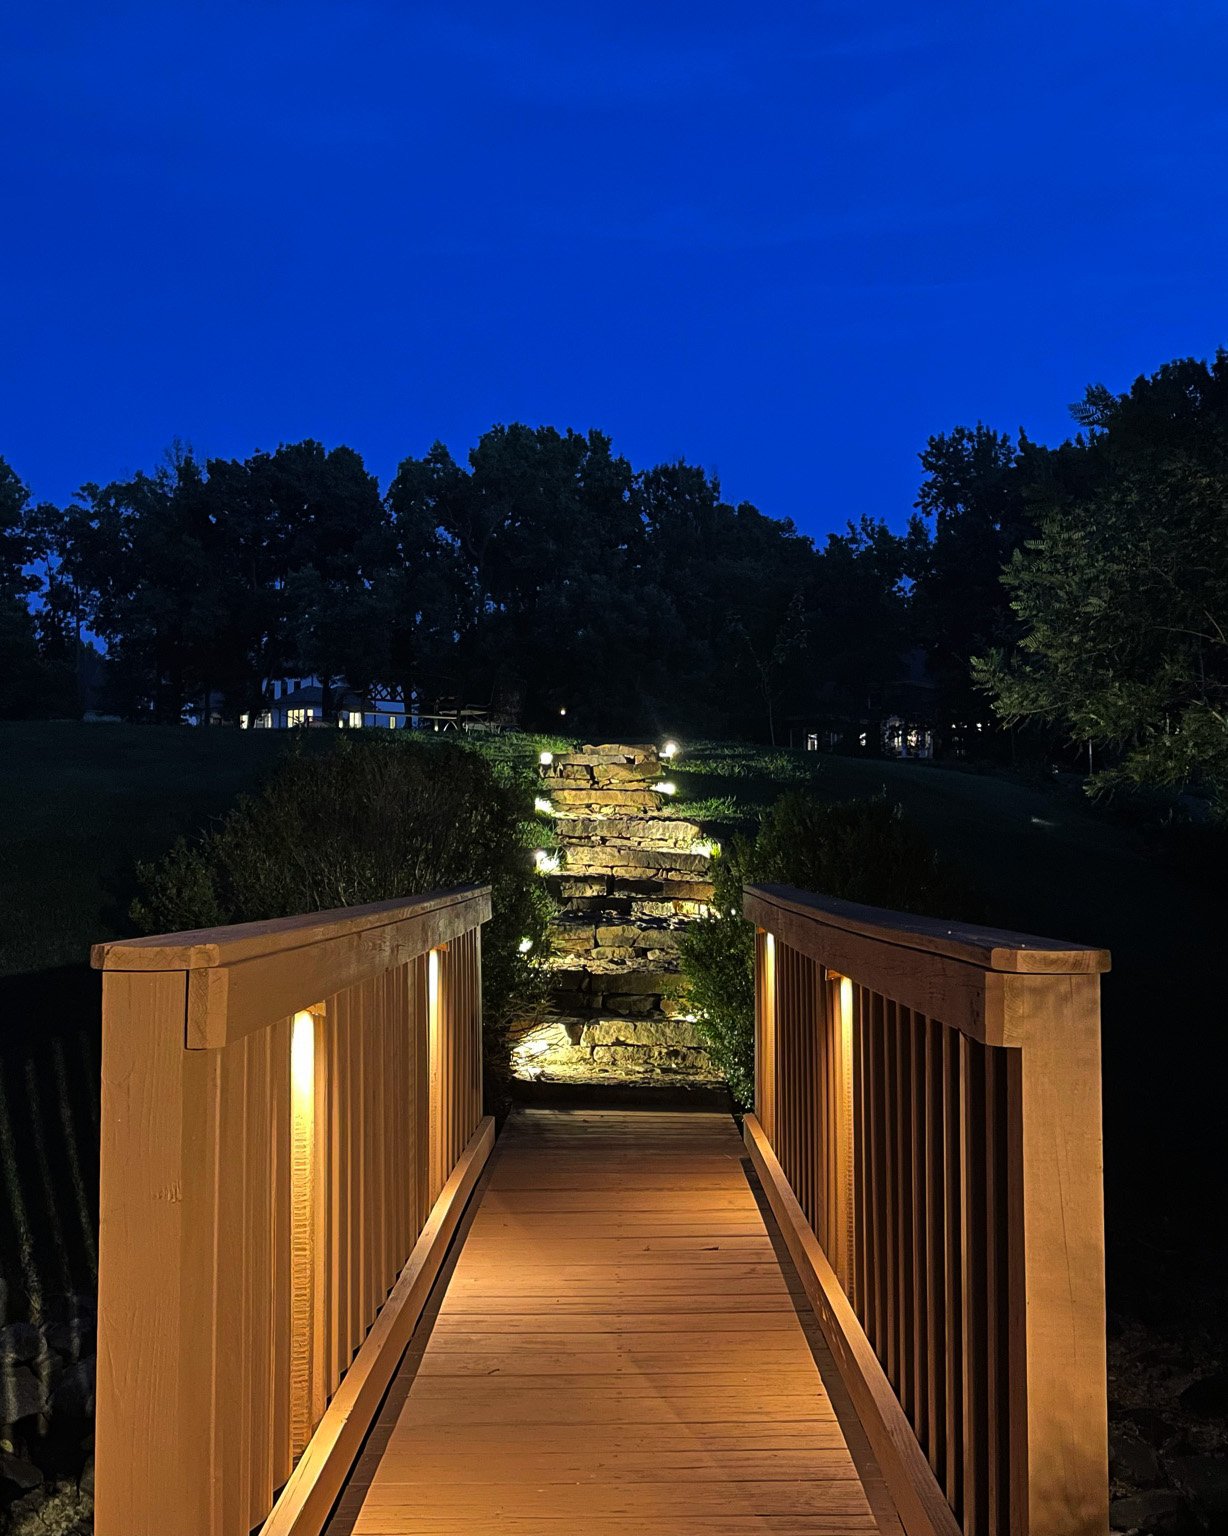  An orange colored wood bridge illuminated by undermount deck lights leads the way to a natural stone path illuminated with low profile path lights. 